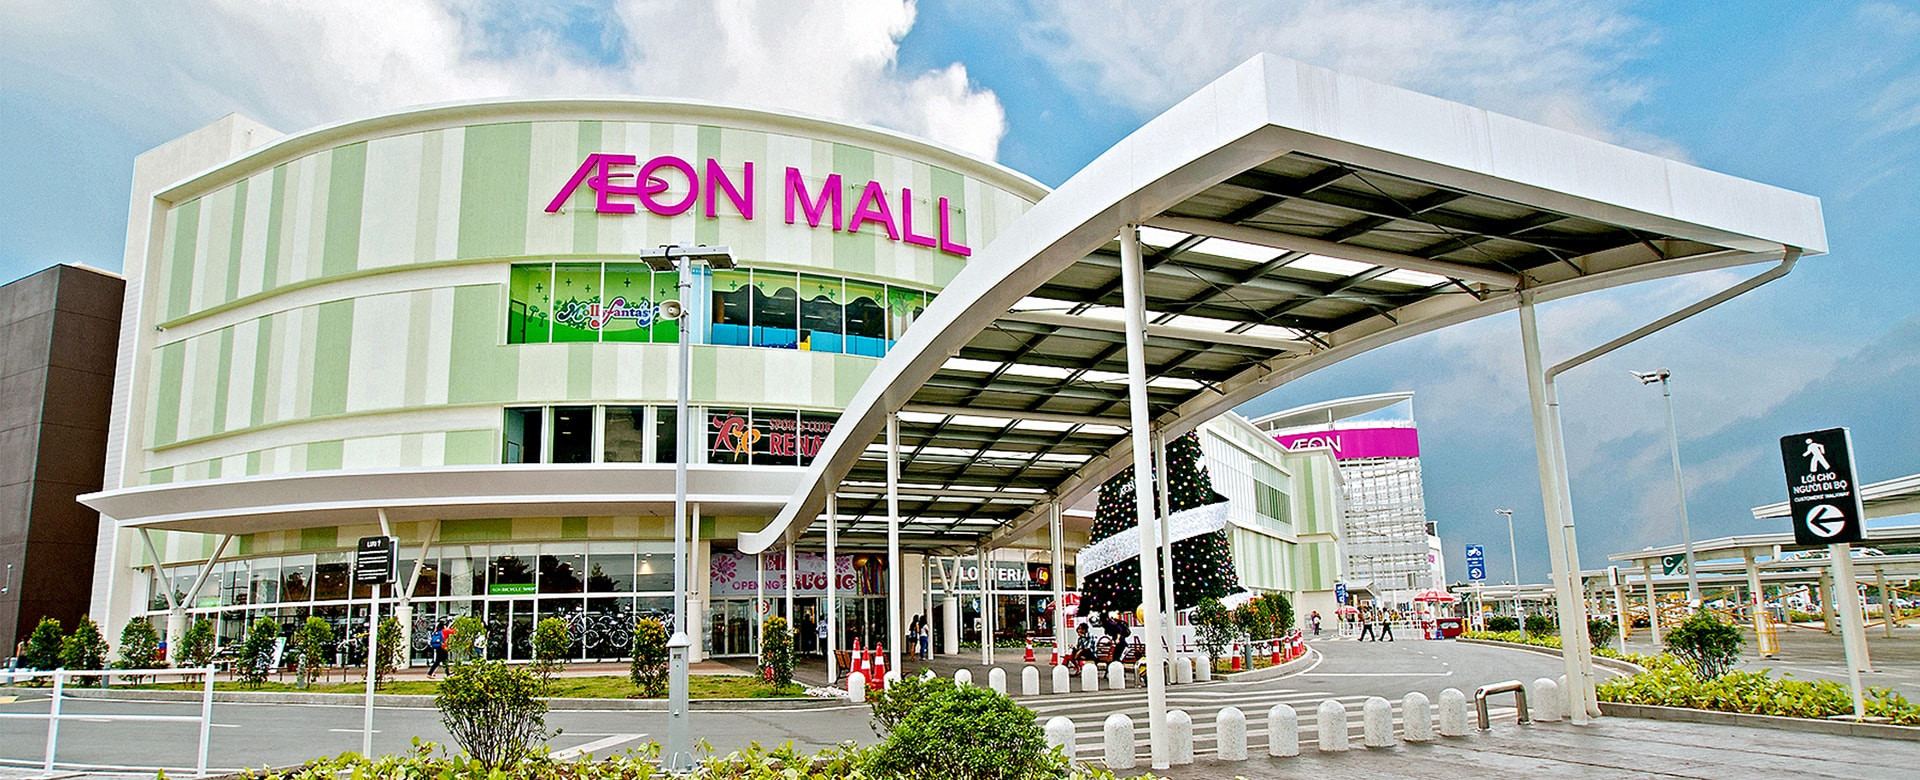 AEONMALL Vietnam – AEONMALL is a specialist shopping mall developer. Our philosophy of putting the customer first has guided our continuing efforts to create malls that enhance the quality of life, stimulate